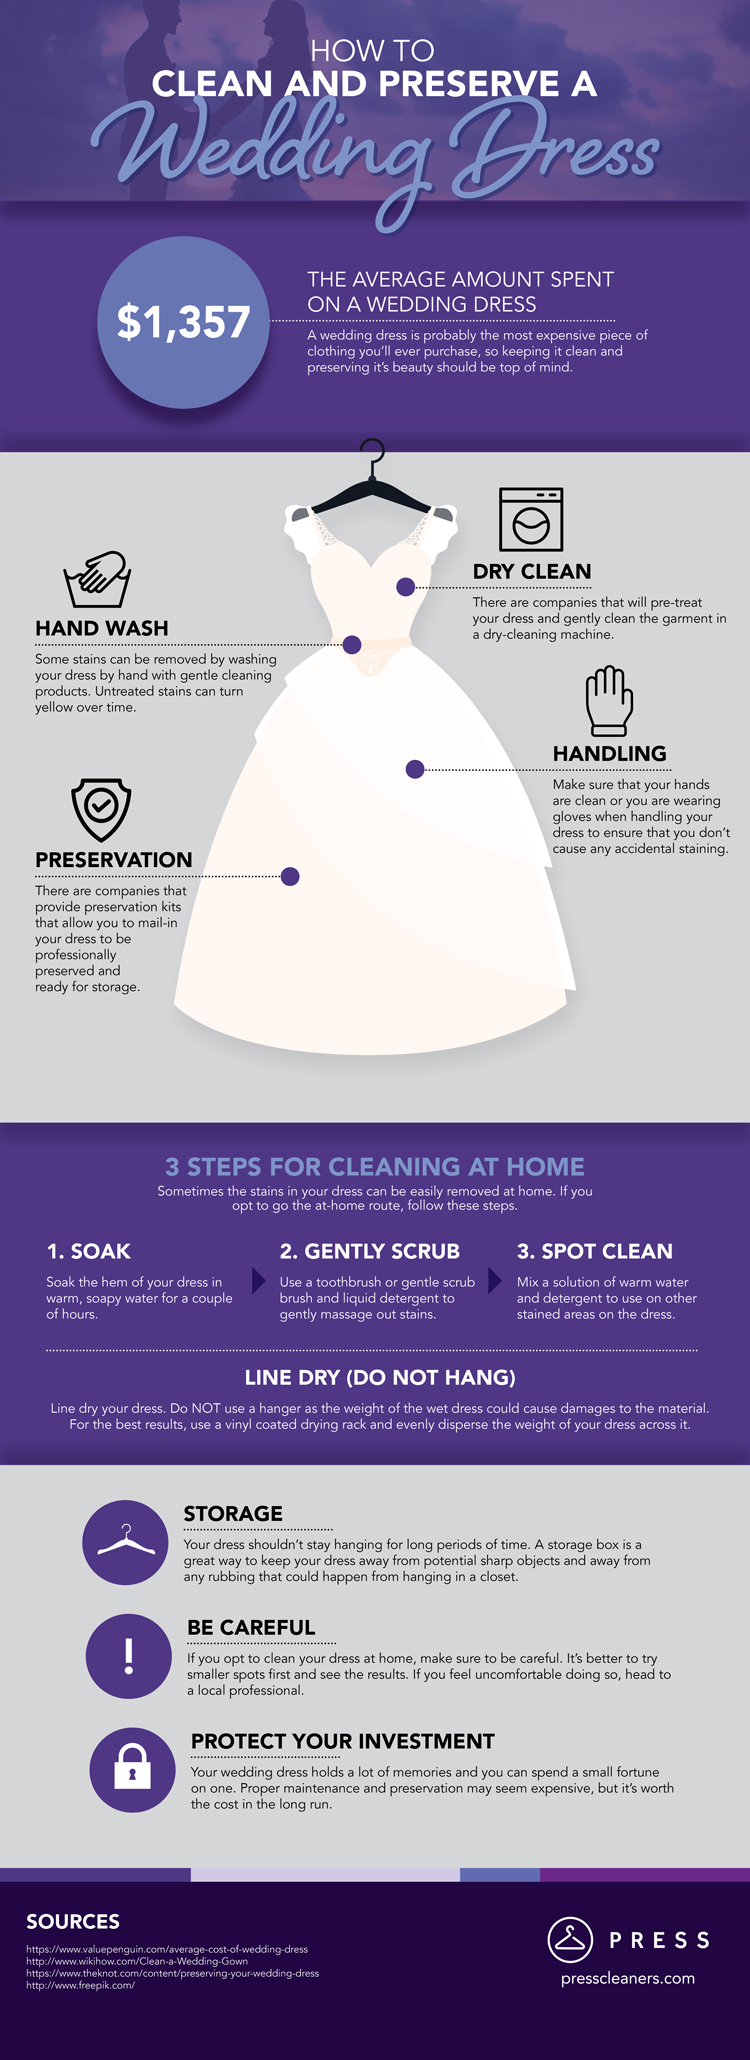 How to Clean & Preserve a Wedding Dress